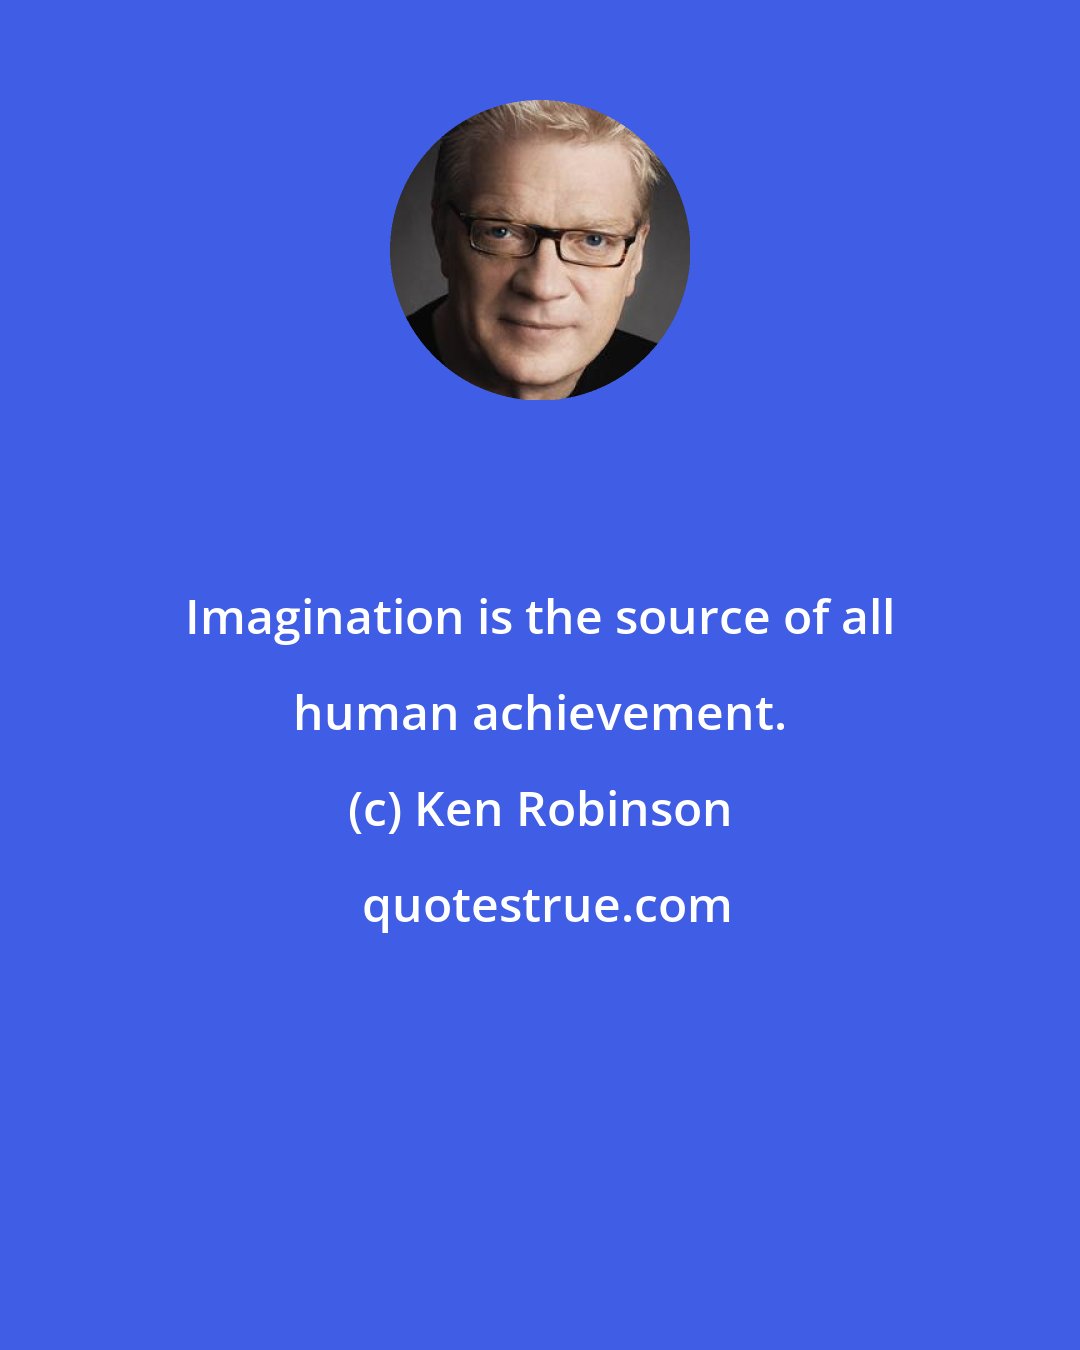 Ken Robinson: Imagination is the source of all human achievement.